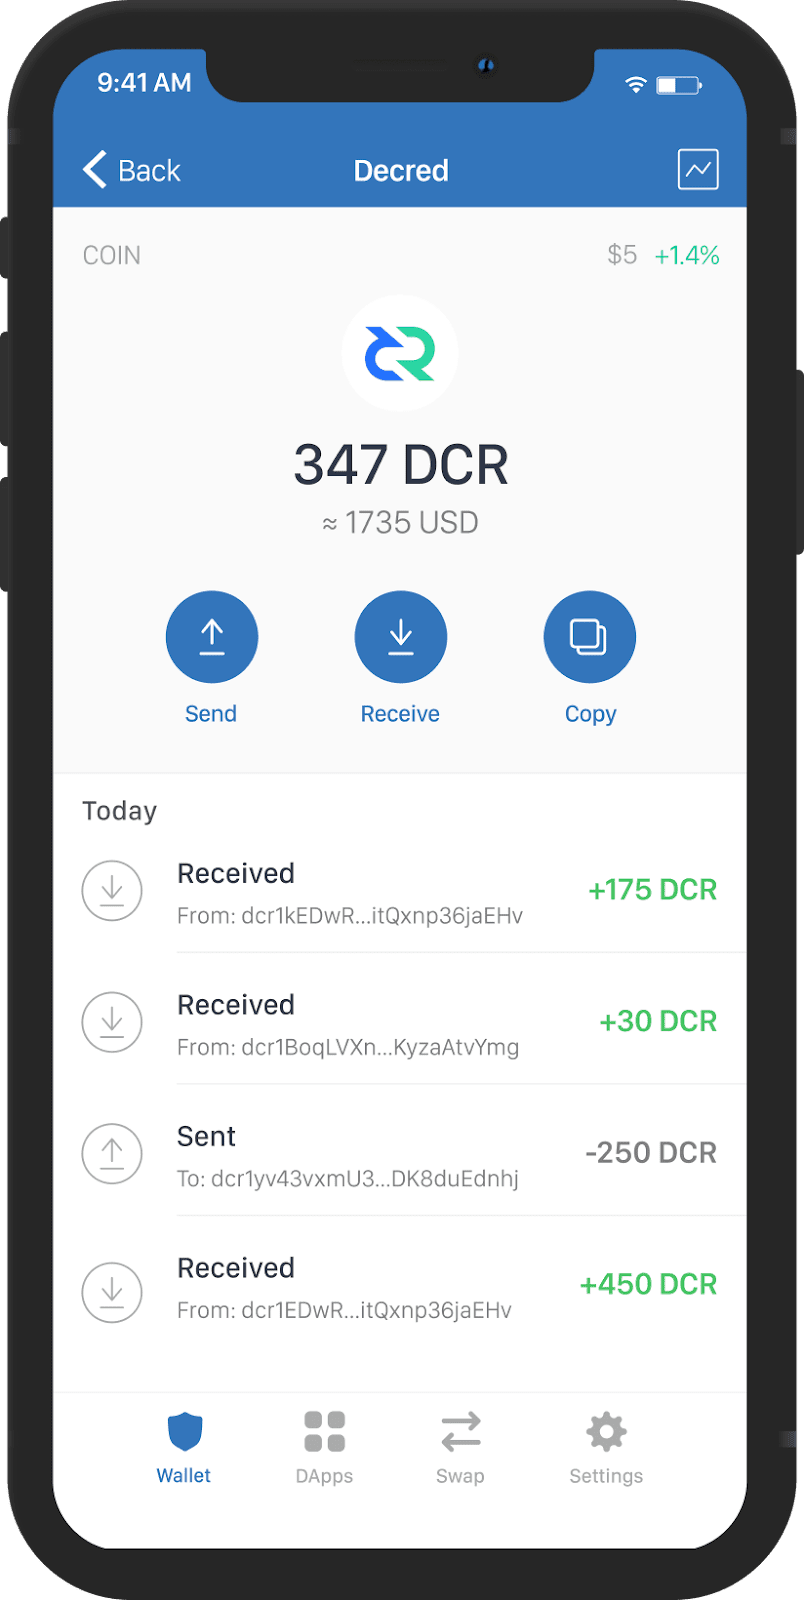 GitHub - planetdecred/dcrios: Decred Mobile Wallet for IOS